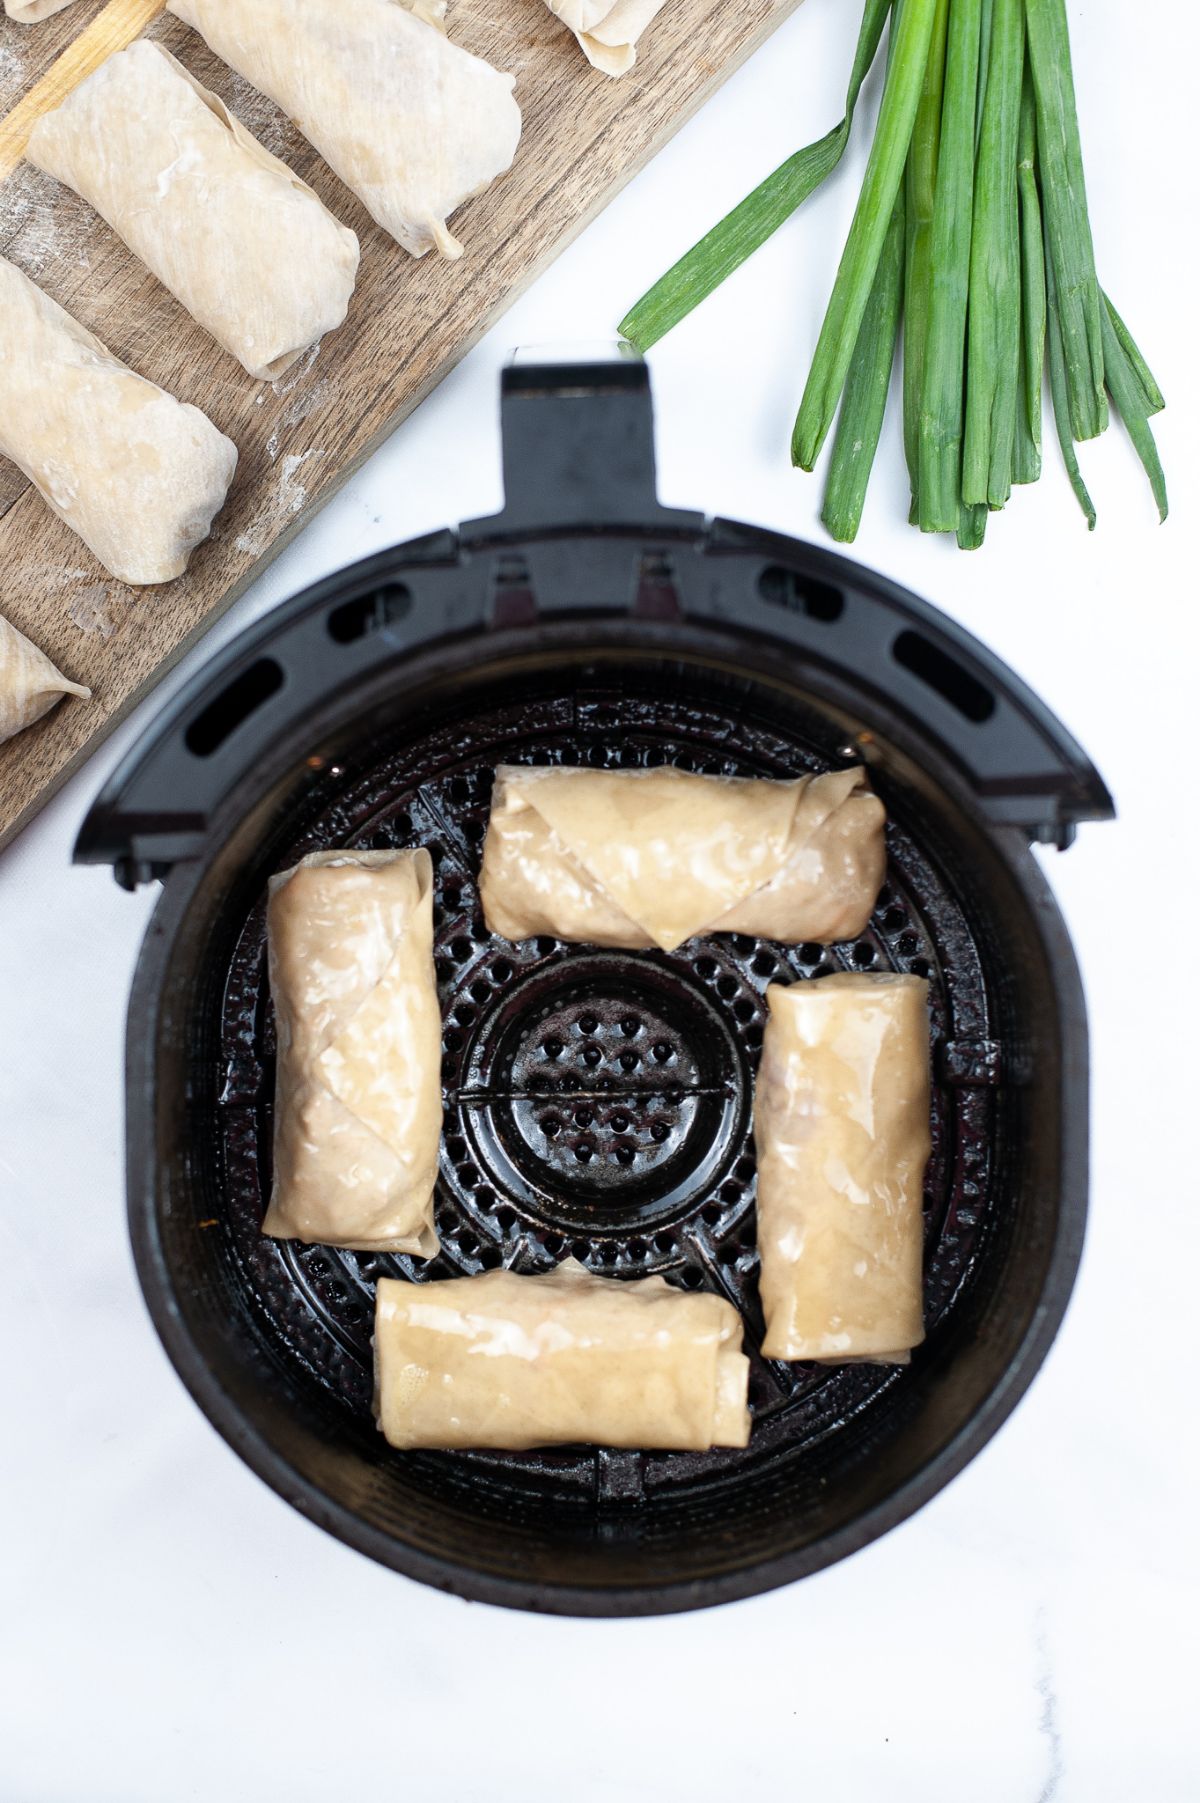 4 egg rolls in an air fryer basket, sprayed with oil and ready to be air fried.